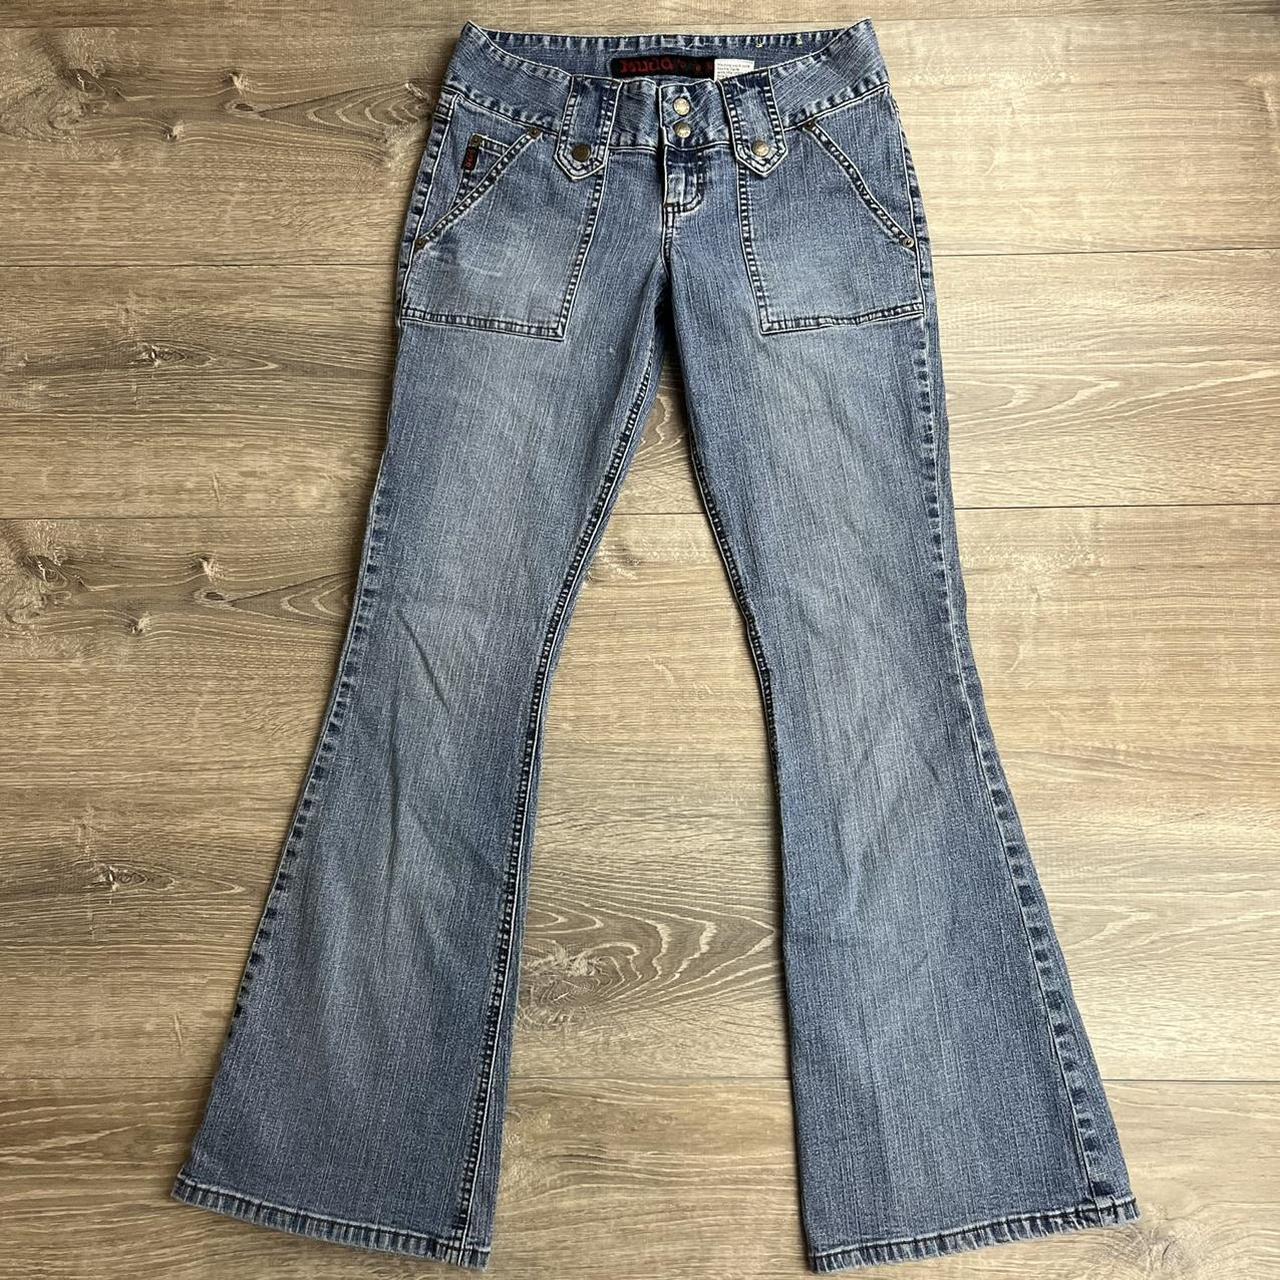 Y2K Mudd Jeans Flared Bottoms Unique Pockets Made In... - Depop